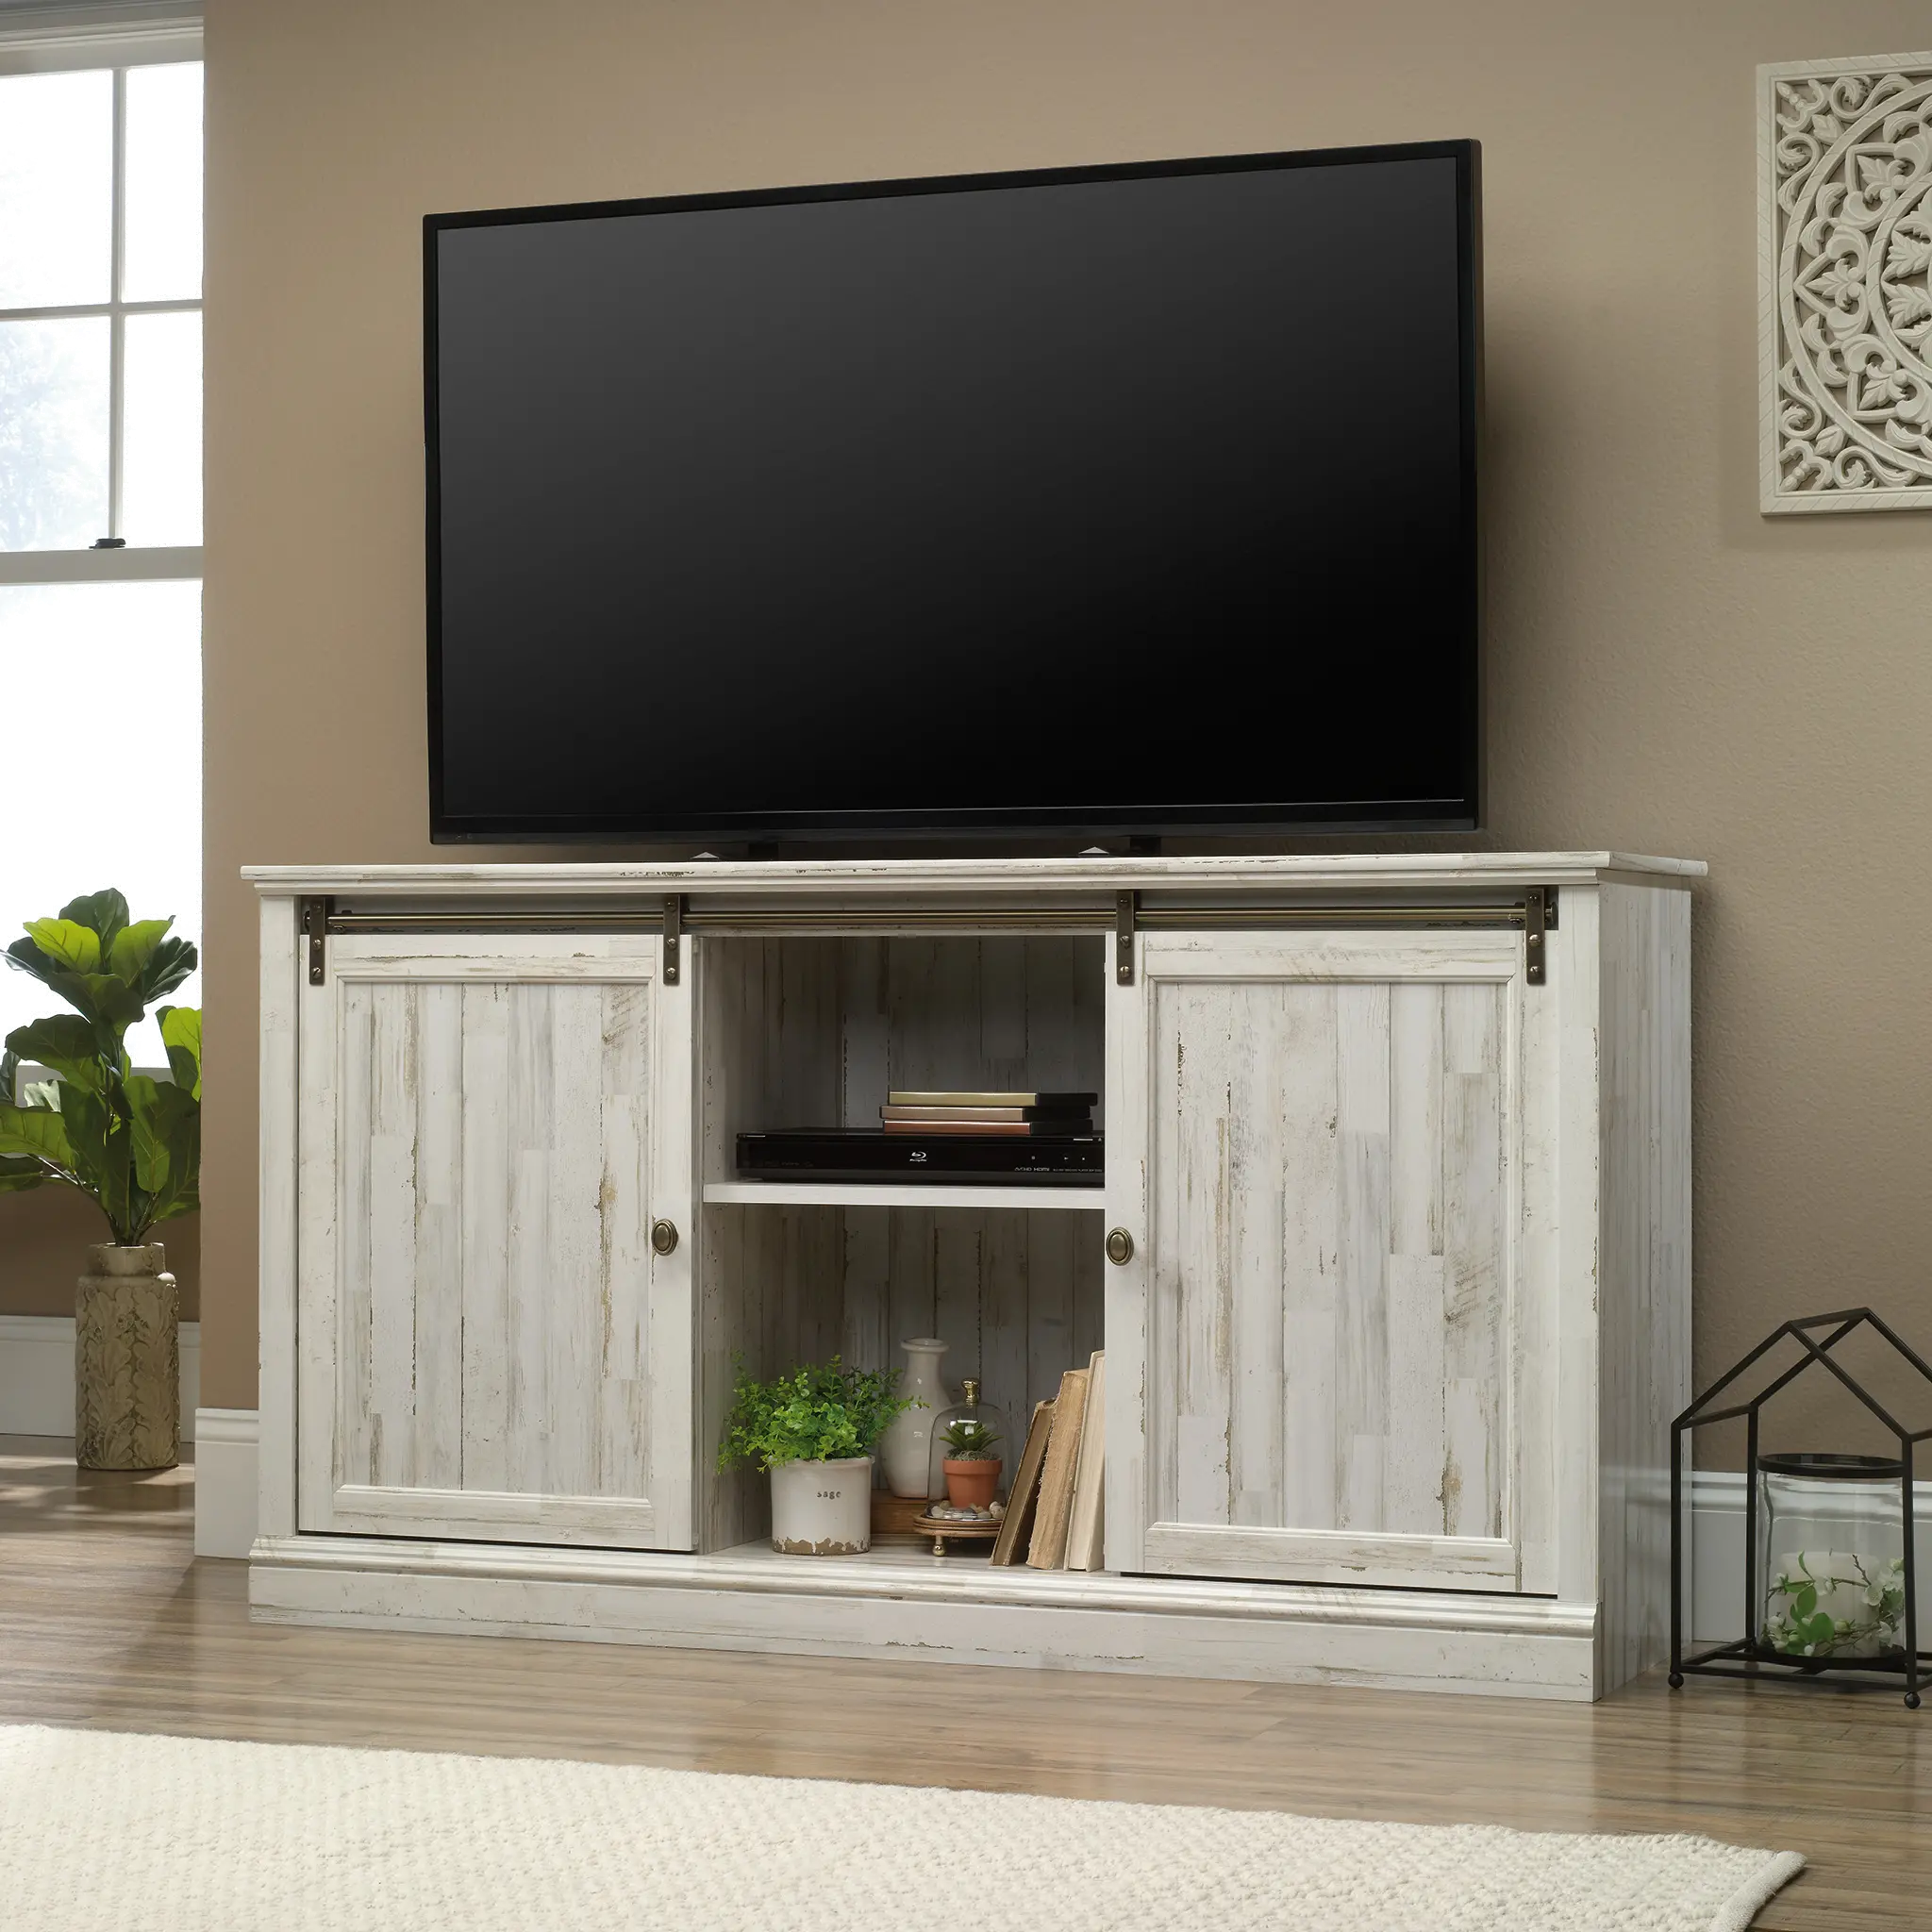 Barrister Lane Antique White 61" TV Stand